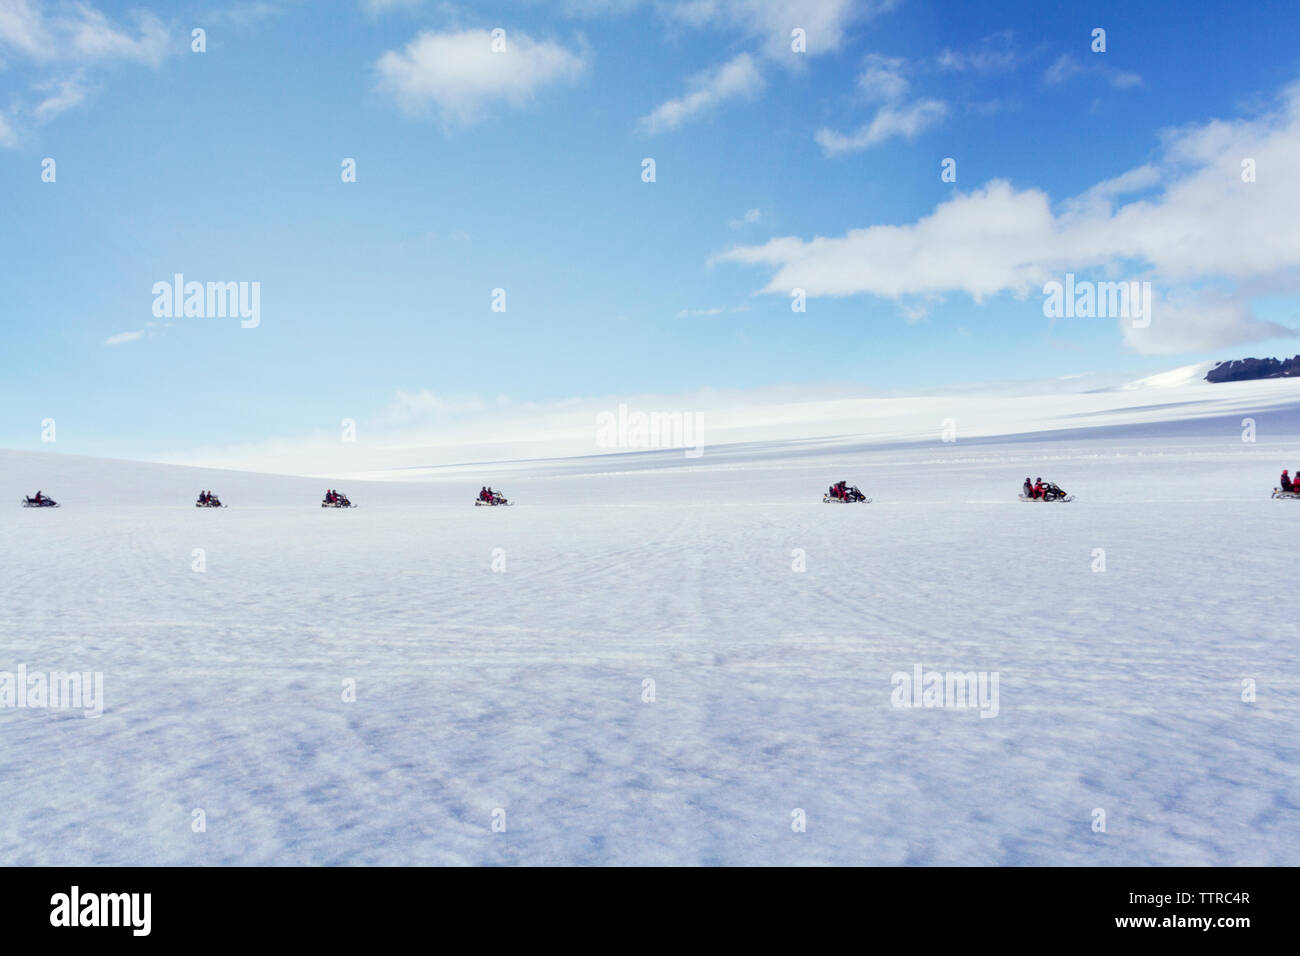 Mid distance of people riding snowmobiles on landscape against blue sky Stock Photo